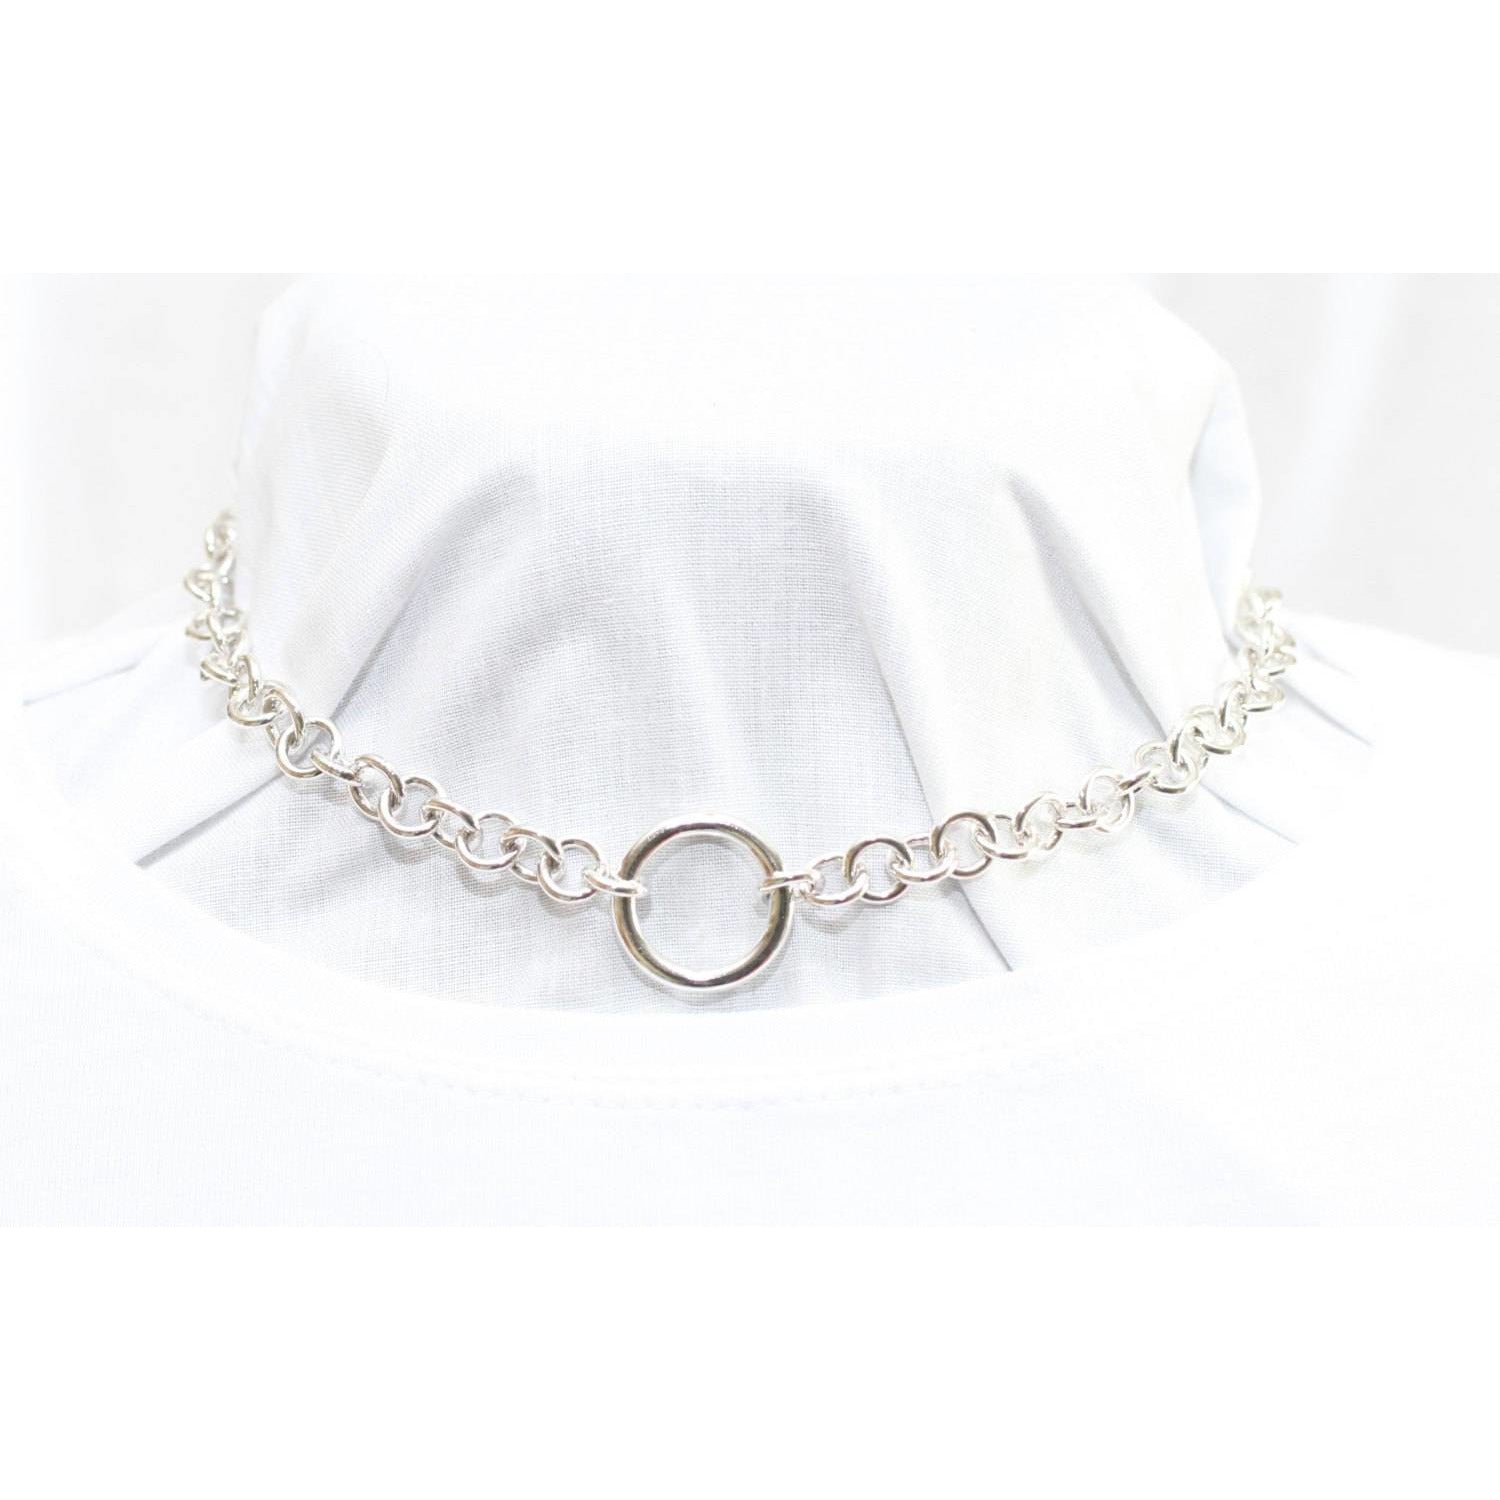 submissive_jewelrysubmissive_collarslave_collarSilver_day_collarNecklaceJewelrydiscreet_collarday_collarCollar_bdsmbdsm_jewelrybdsm_day_collarbdsm_collarsbdsm_collar_discreetBDSM_collarbdsm